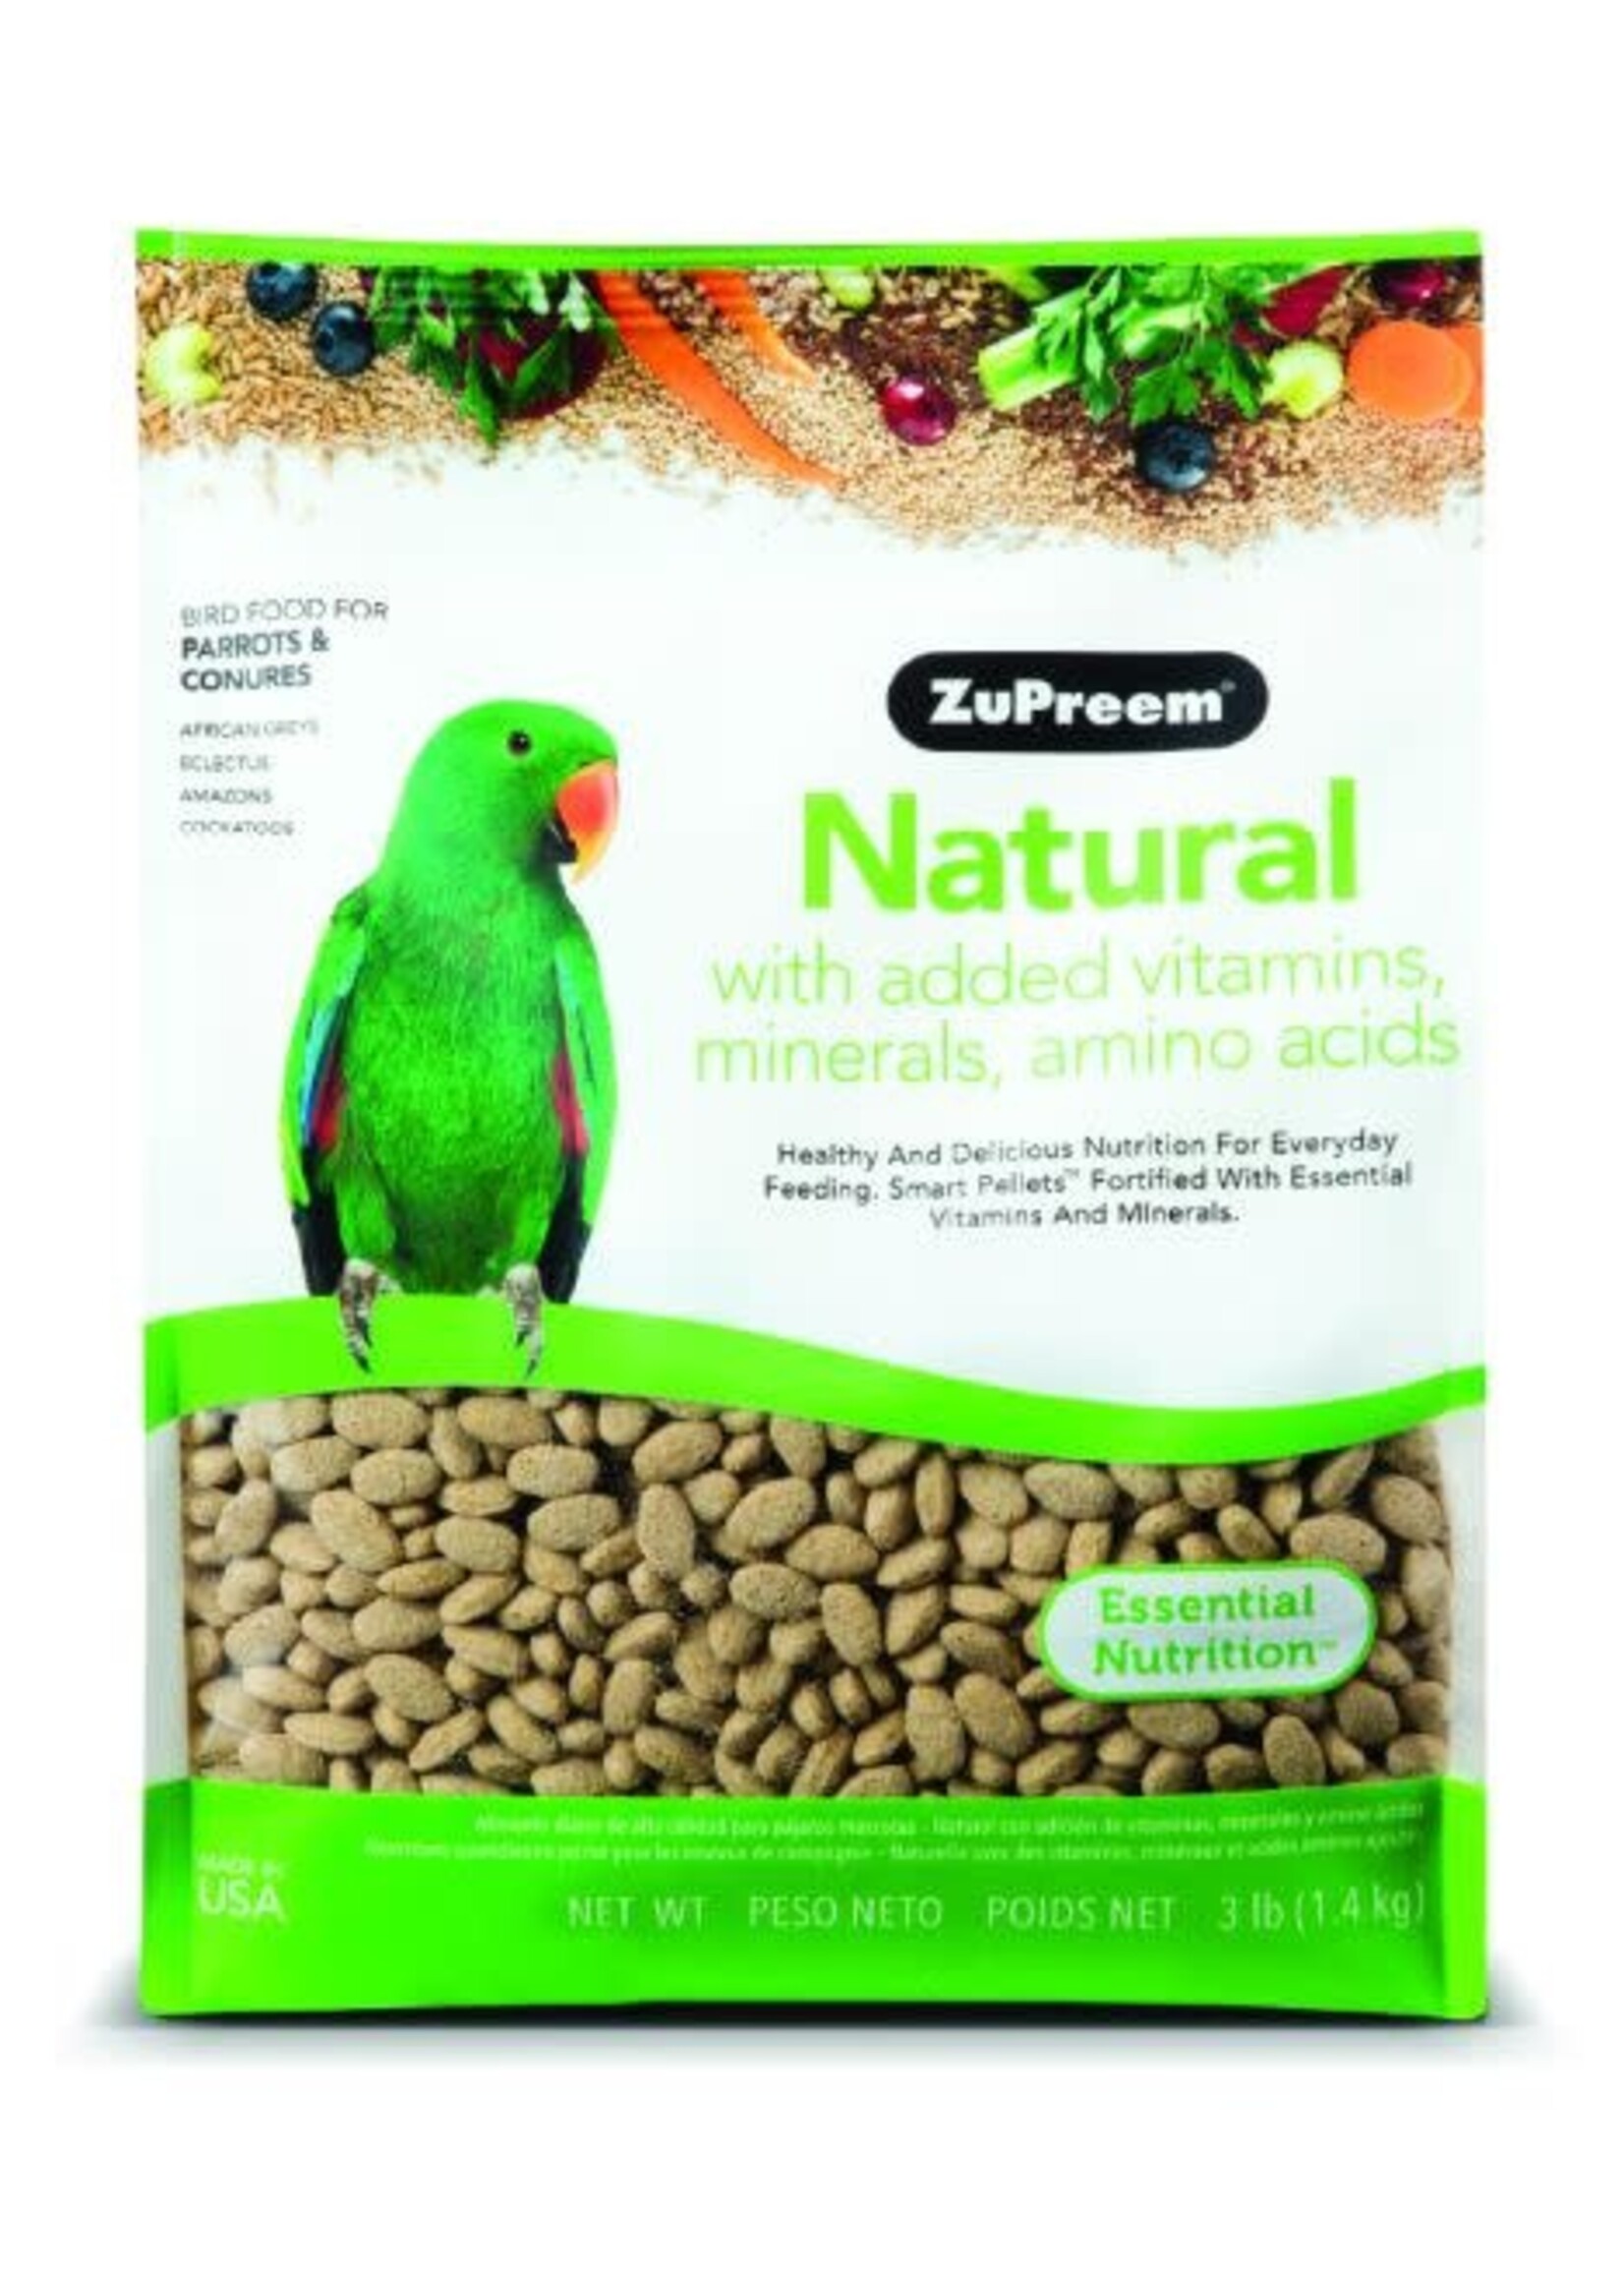 Zupreem ZuPreem "Natural" Food For Conure, Small Cockatoos & Other Medium To Large Parrot 3lbs 93200